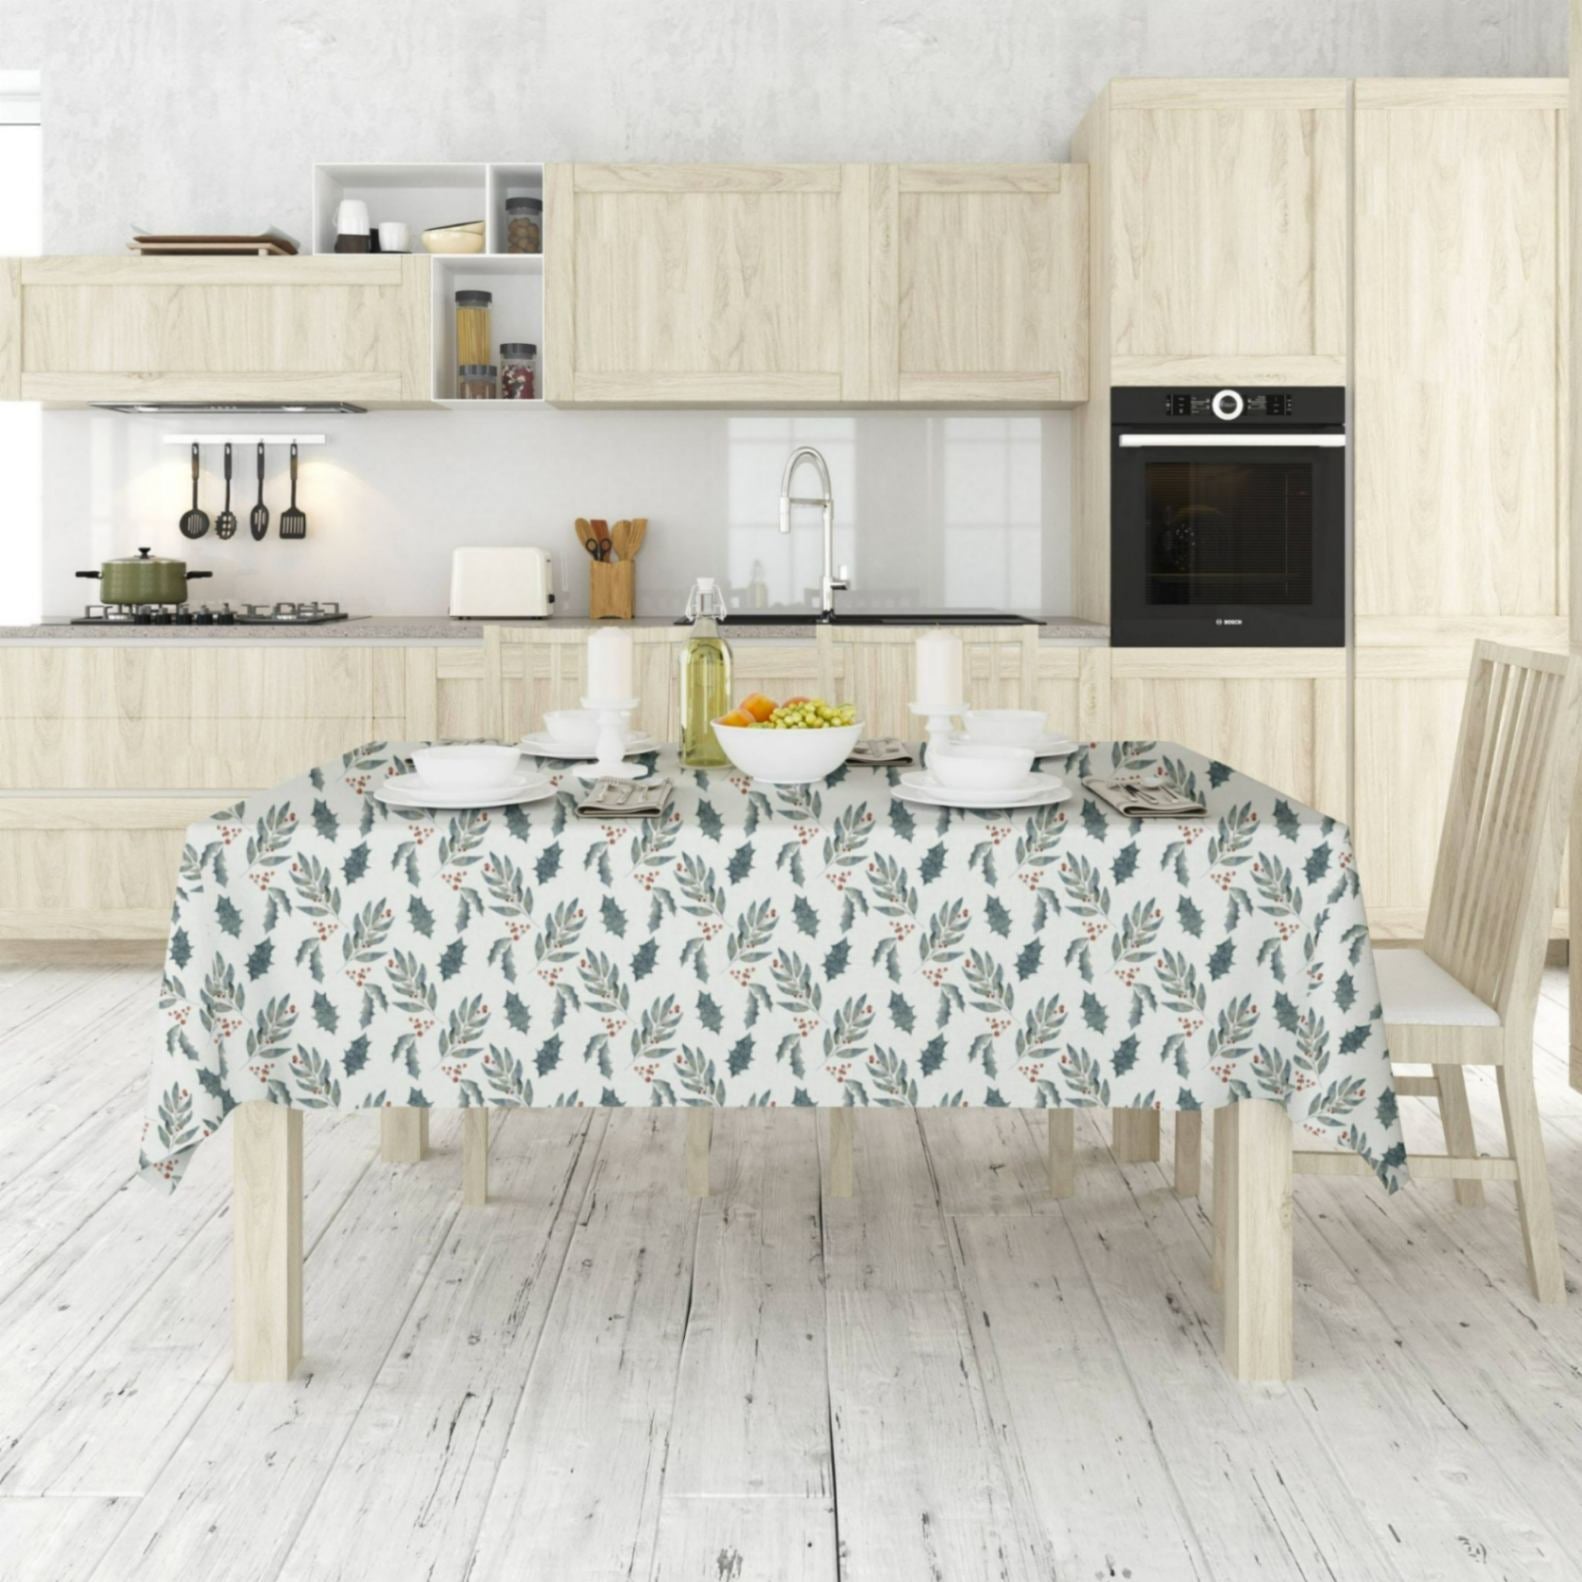 Leaves and Holly Tablecloth - ZumBuys